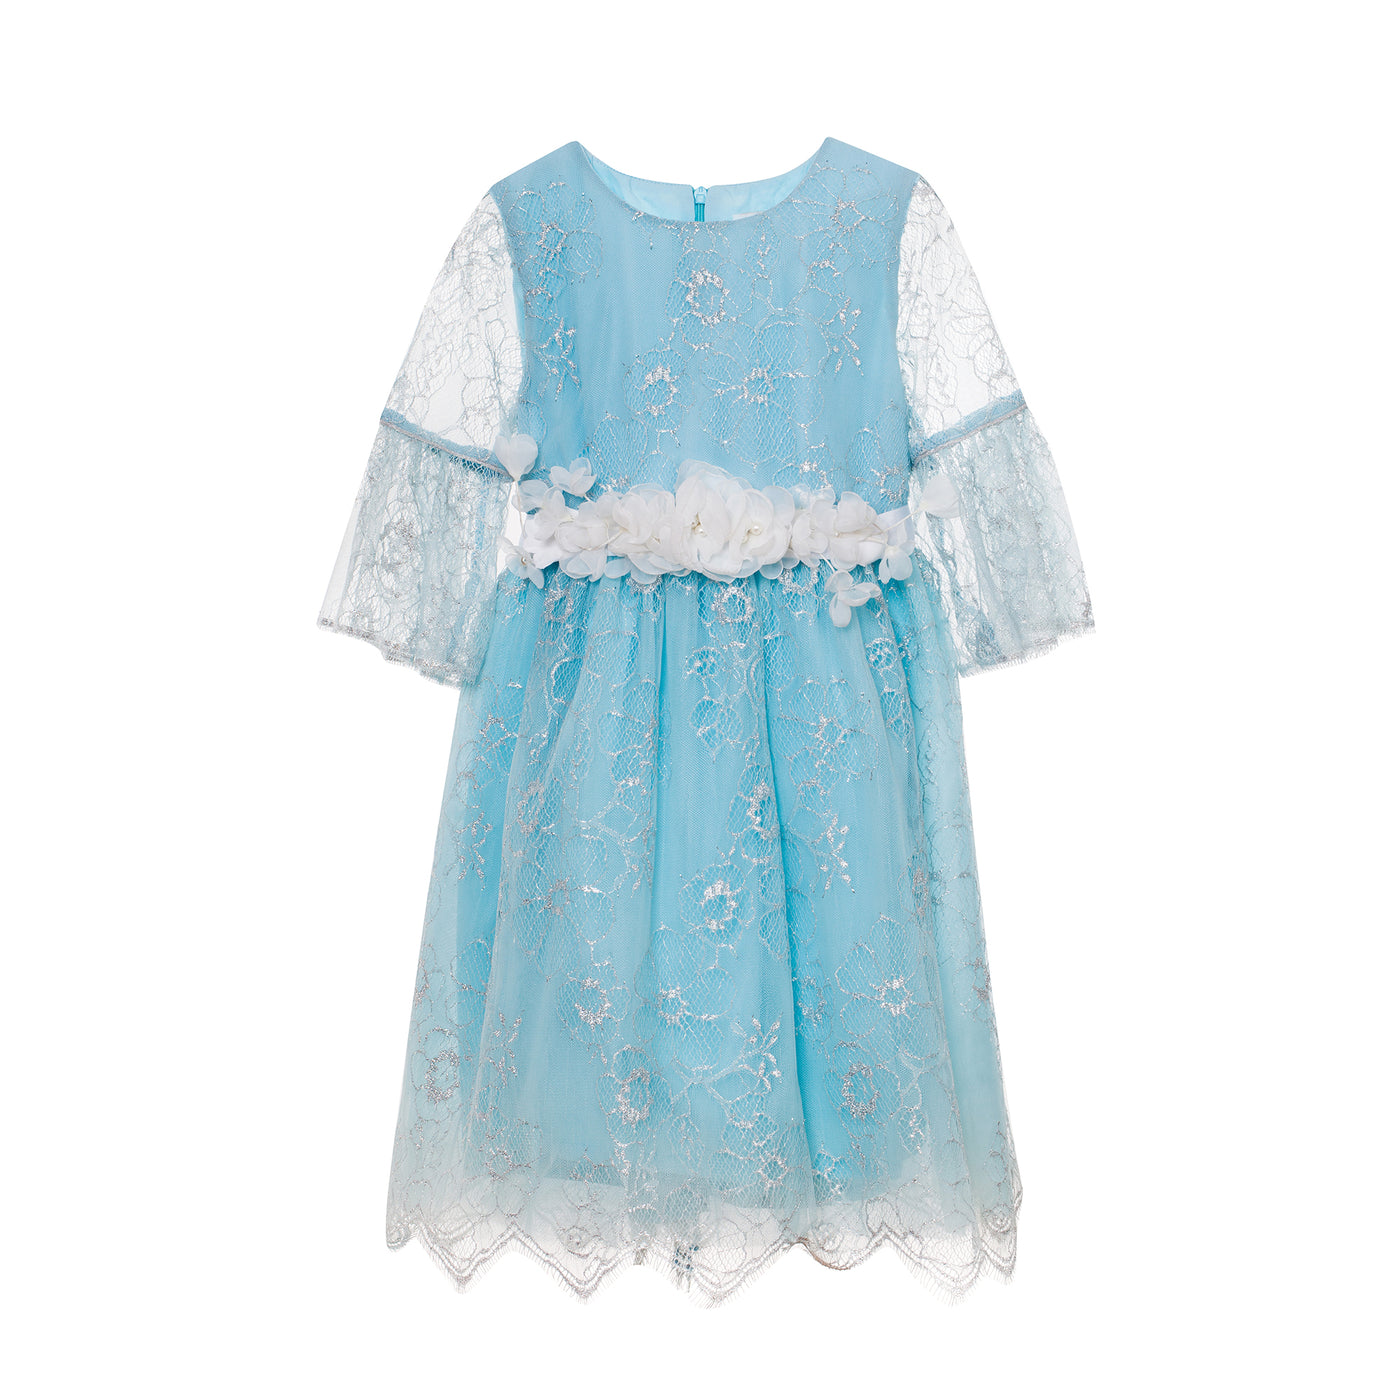 Baby blue and silver lace dress with white flower